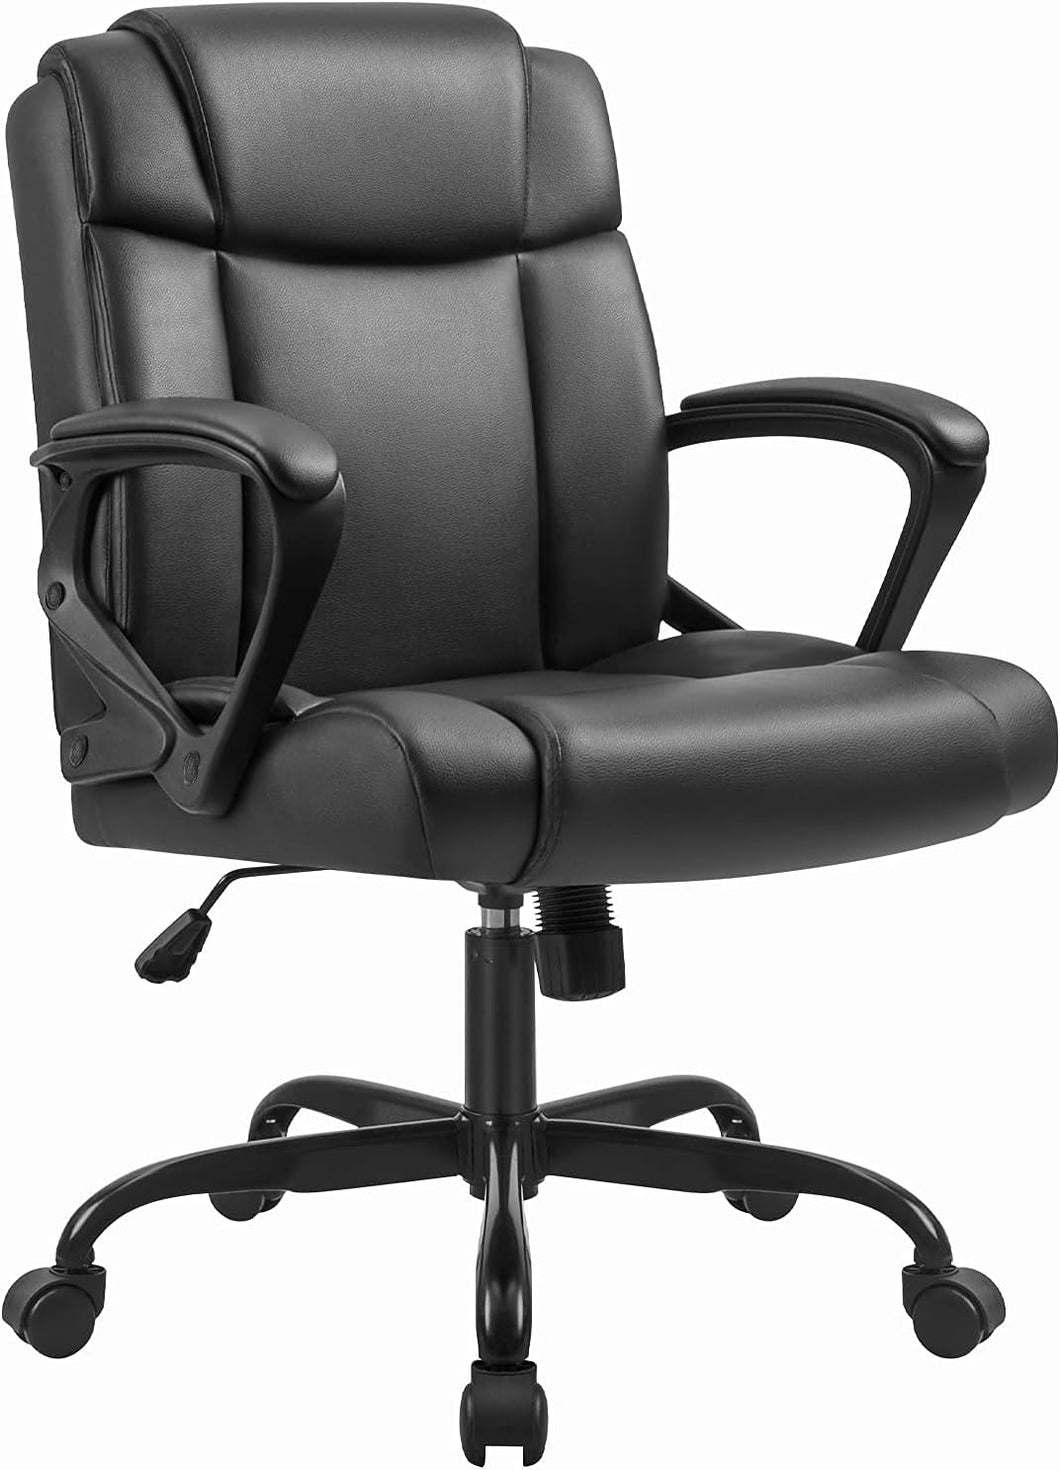 Mid Back Office Chair Computer Chair PU Leather Executive Desk Chair Swivel Chair with Padded Arms Back Support Weight Bearing